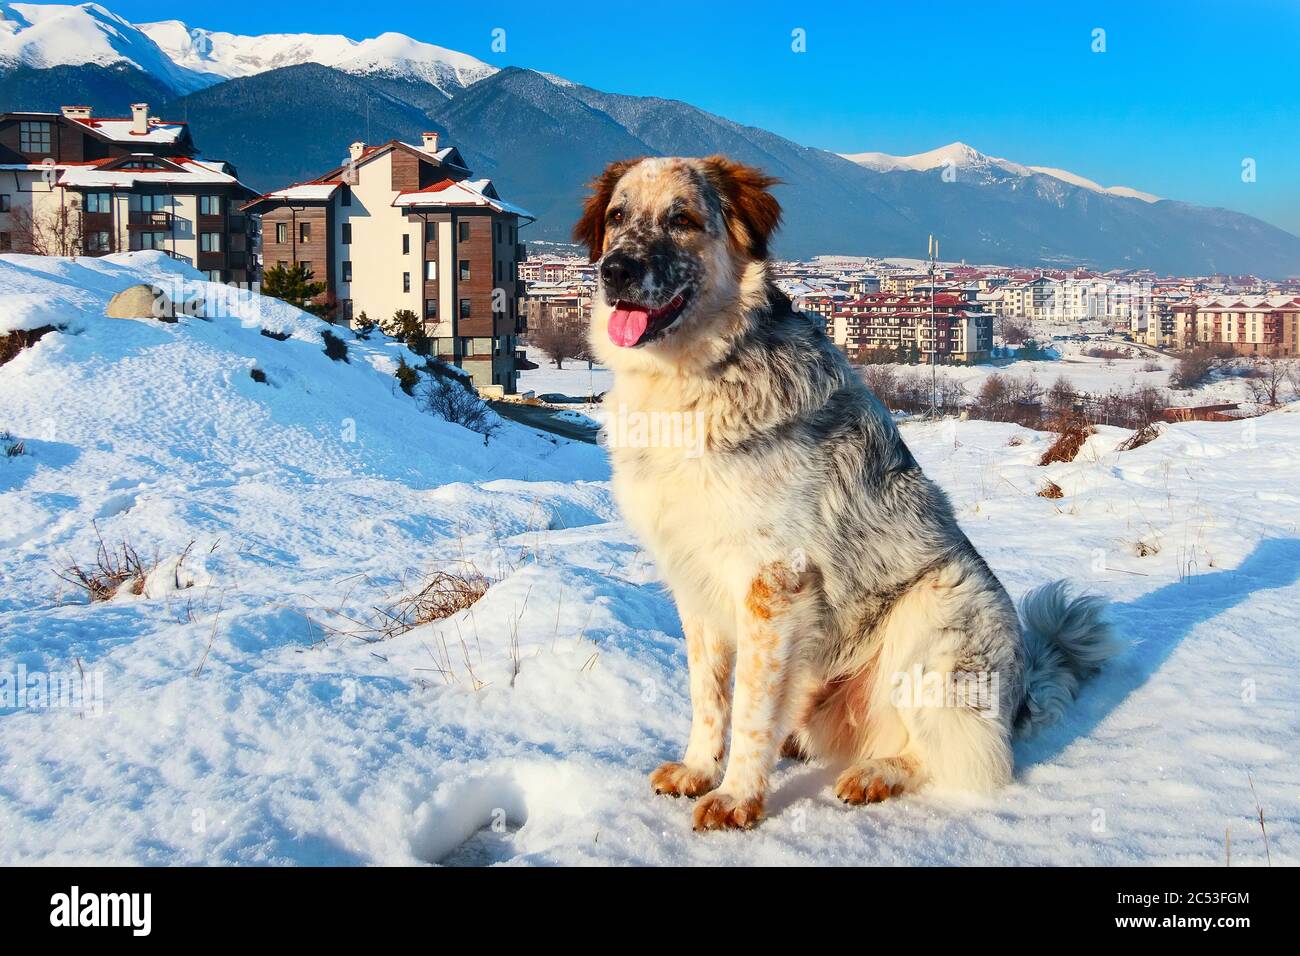 large white, balck and brown color dog, snow in winter town and mountains Stock Photo